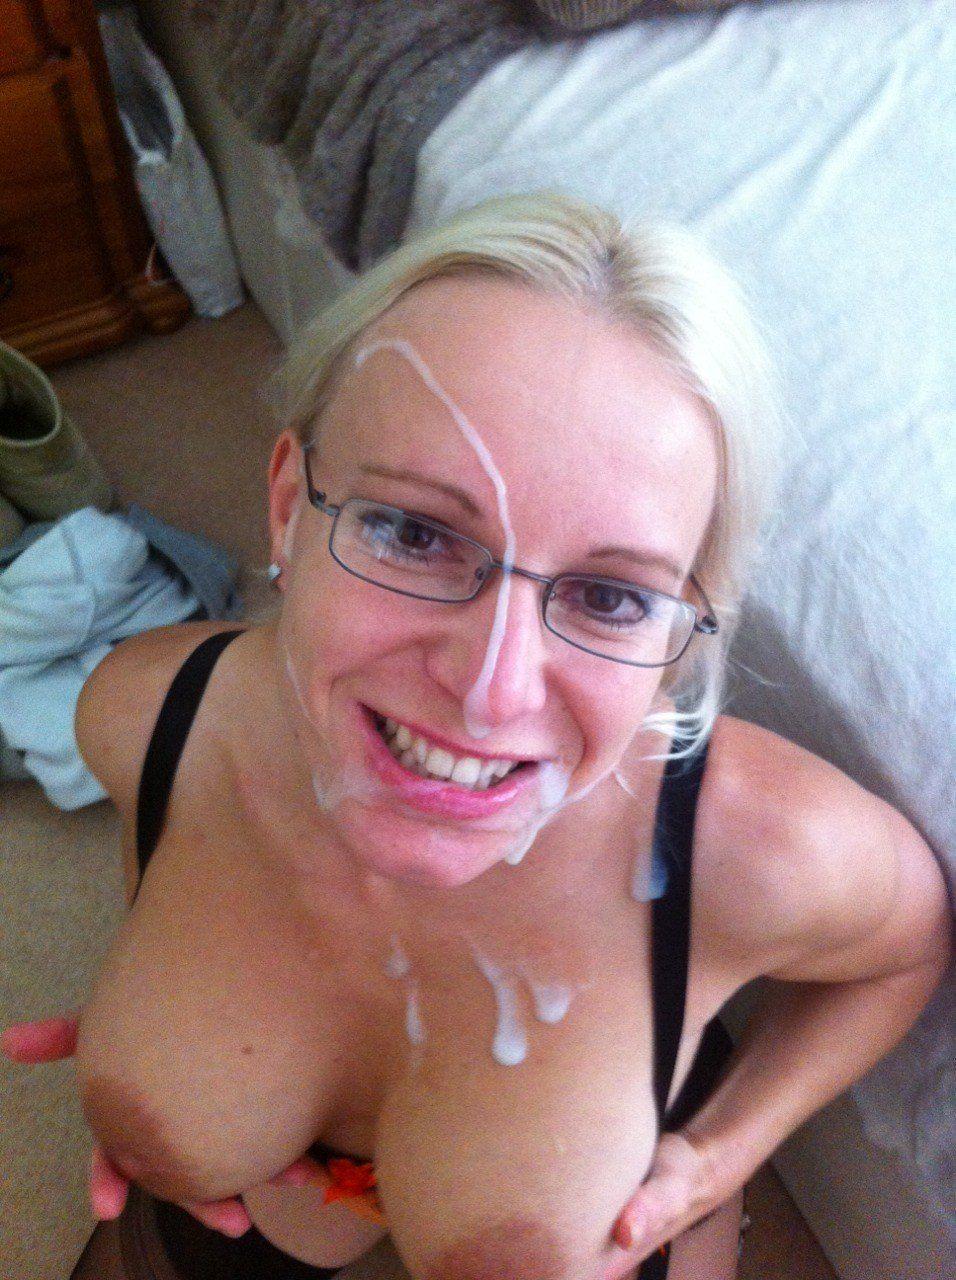 Hot wife get full facial Sex image free